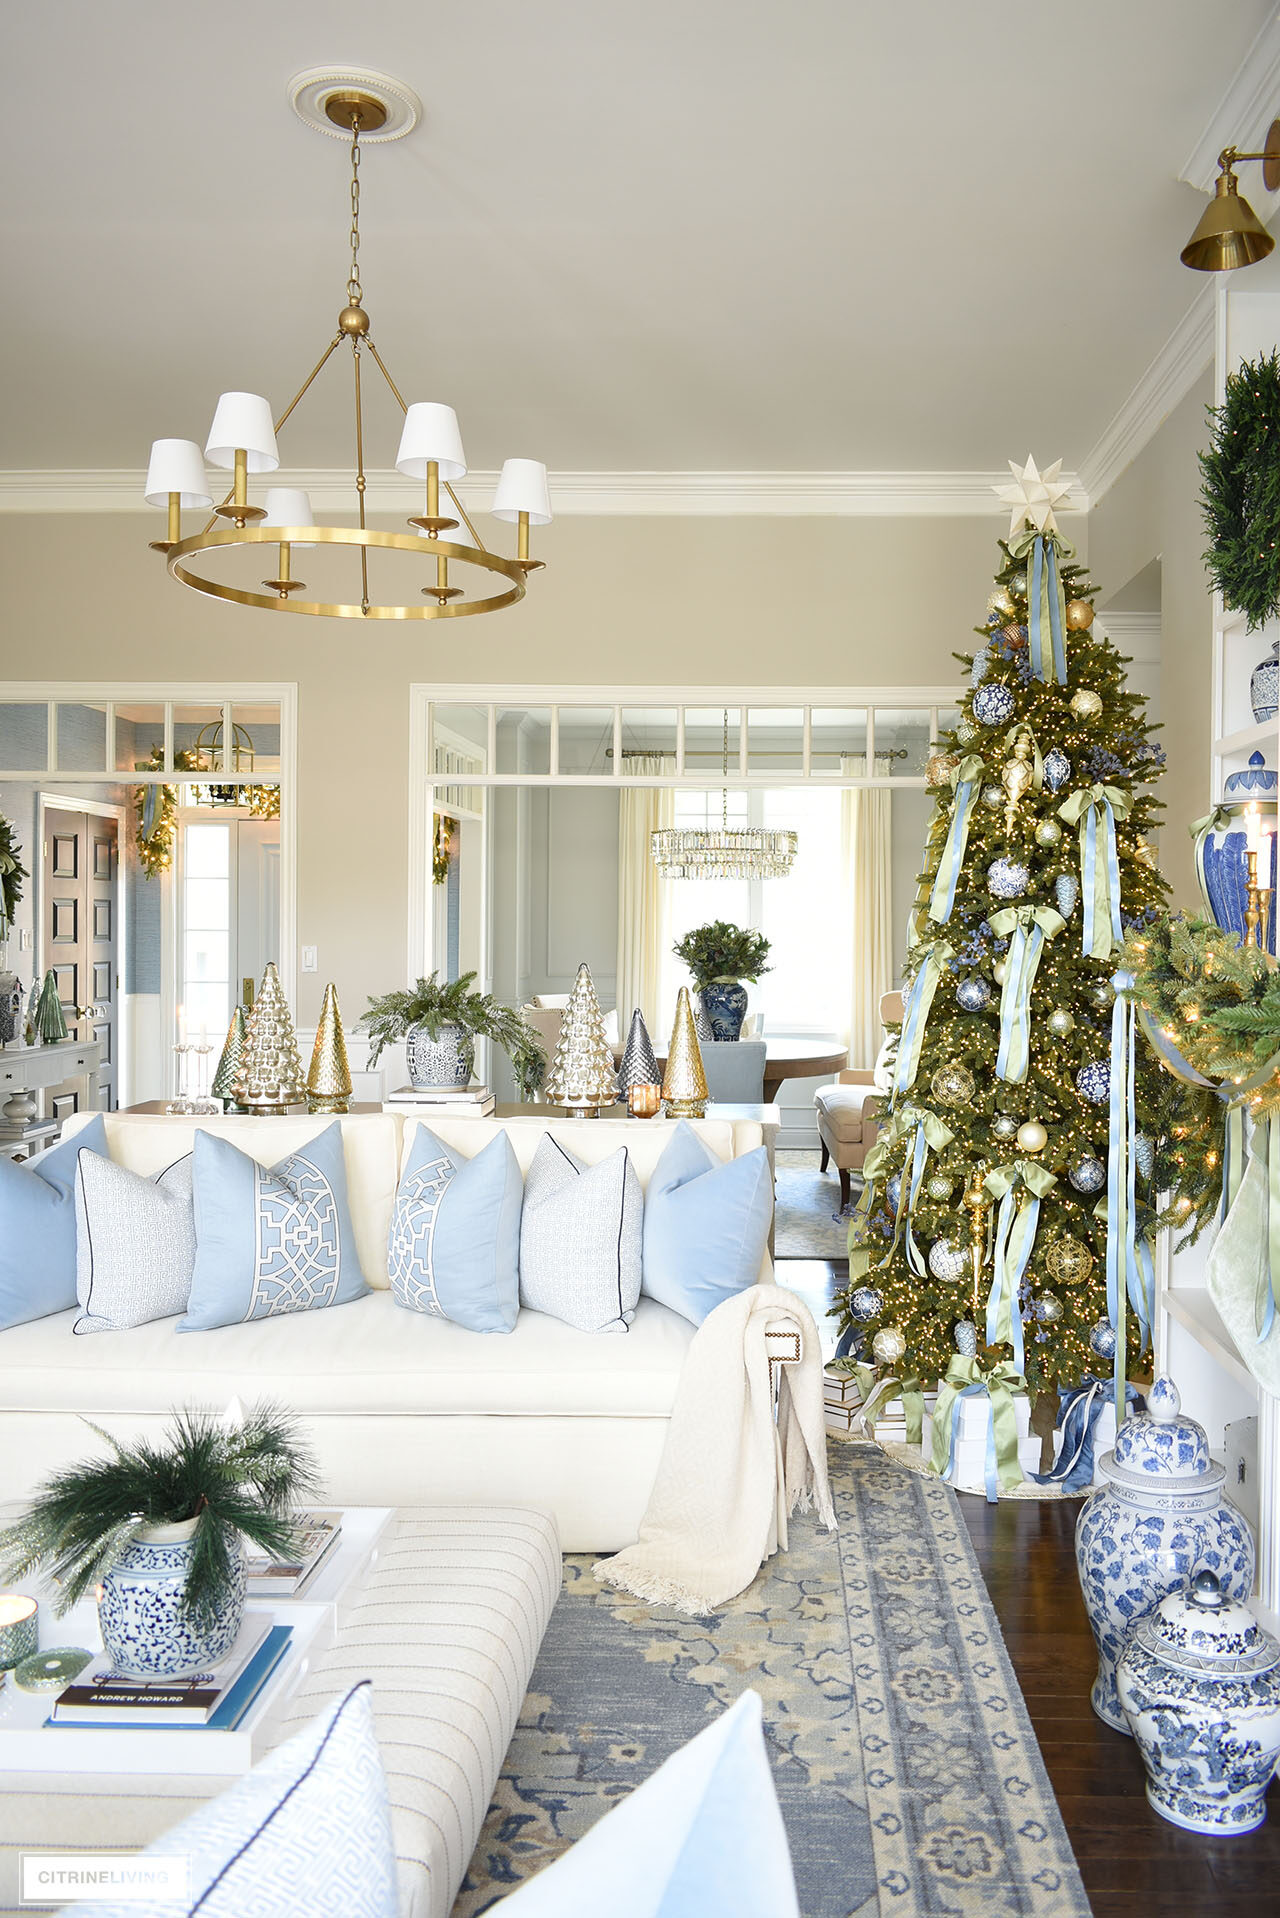 Beautiful Christmas decorated living room , white sofa with blue pillows, Christmas tree with light green and blue bows.